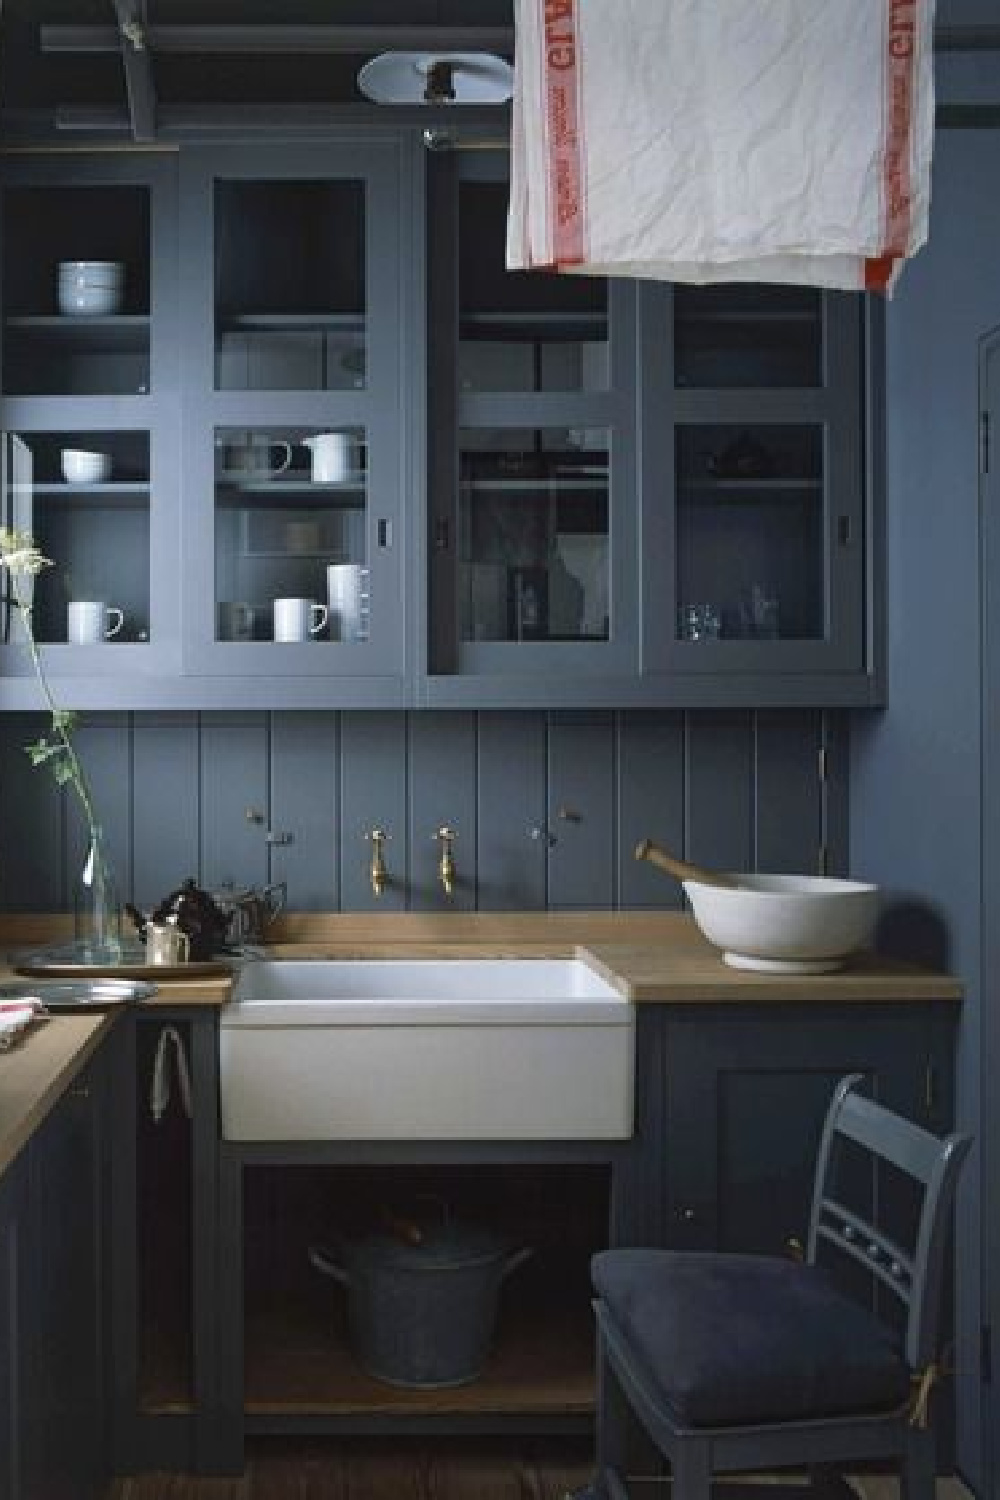 Rustic dark blue English country kitchen by Plain English. Similar paint color is Behr Opera Glasses. #bluekitchens #englishcountry